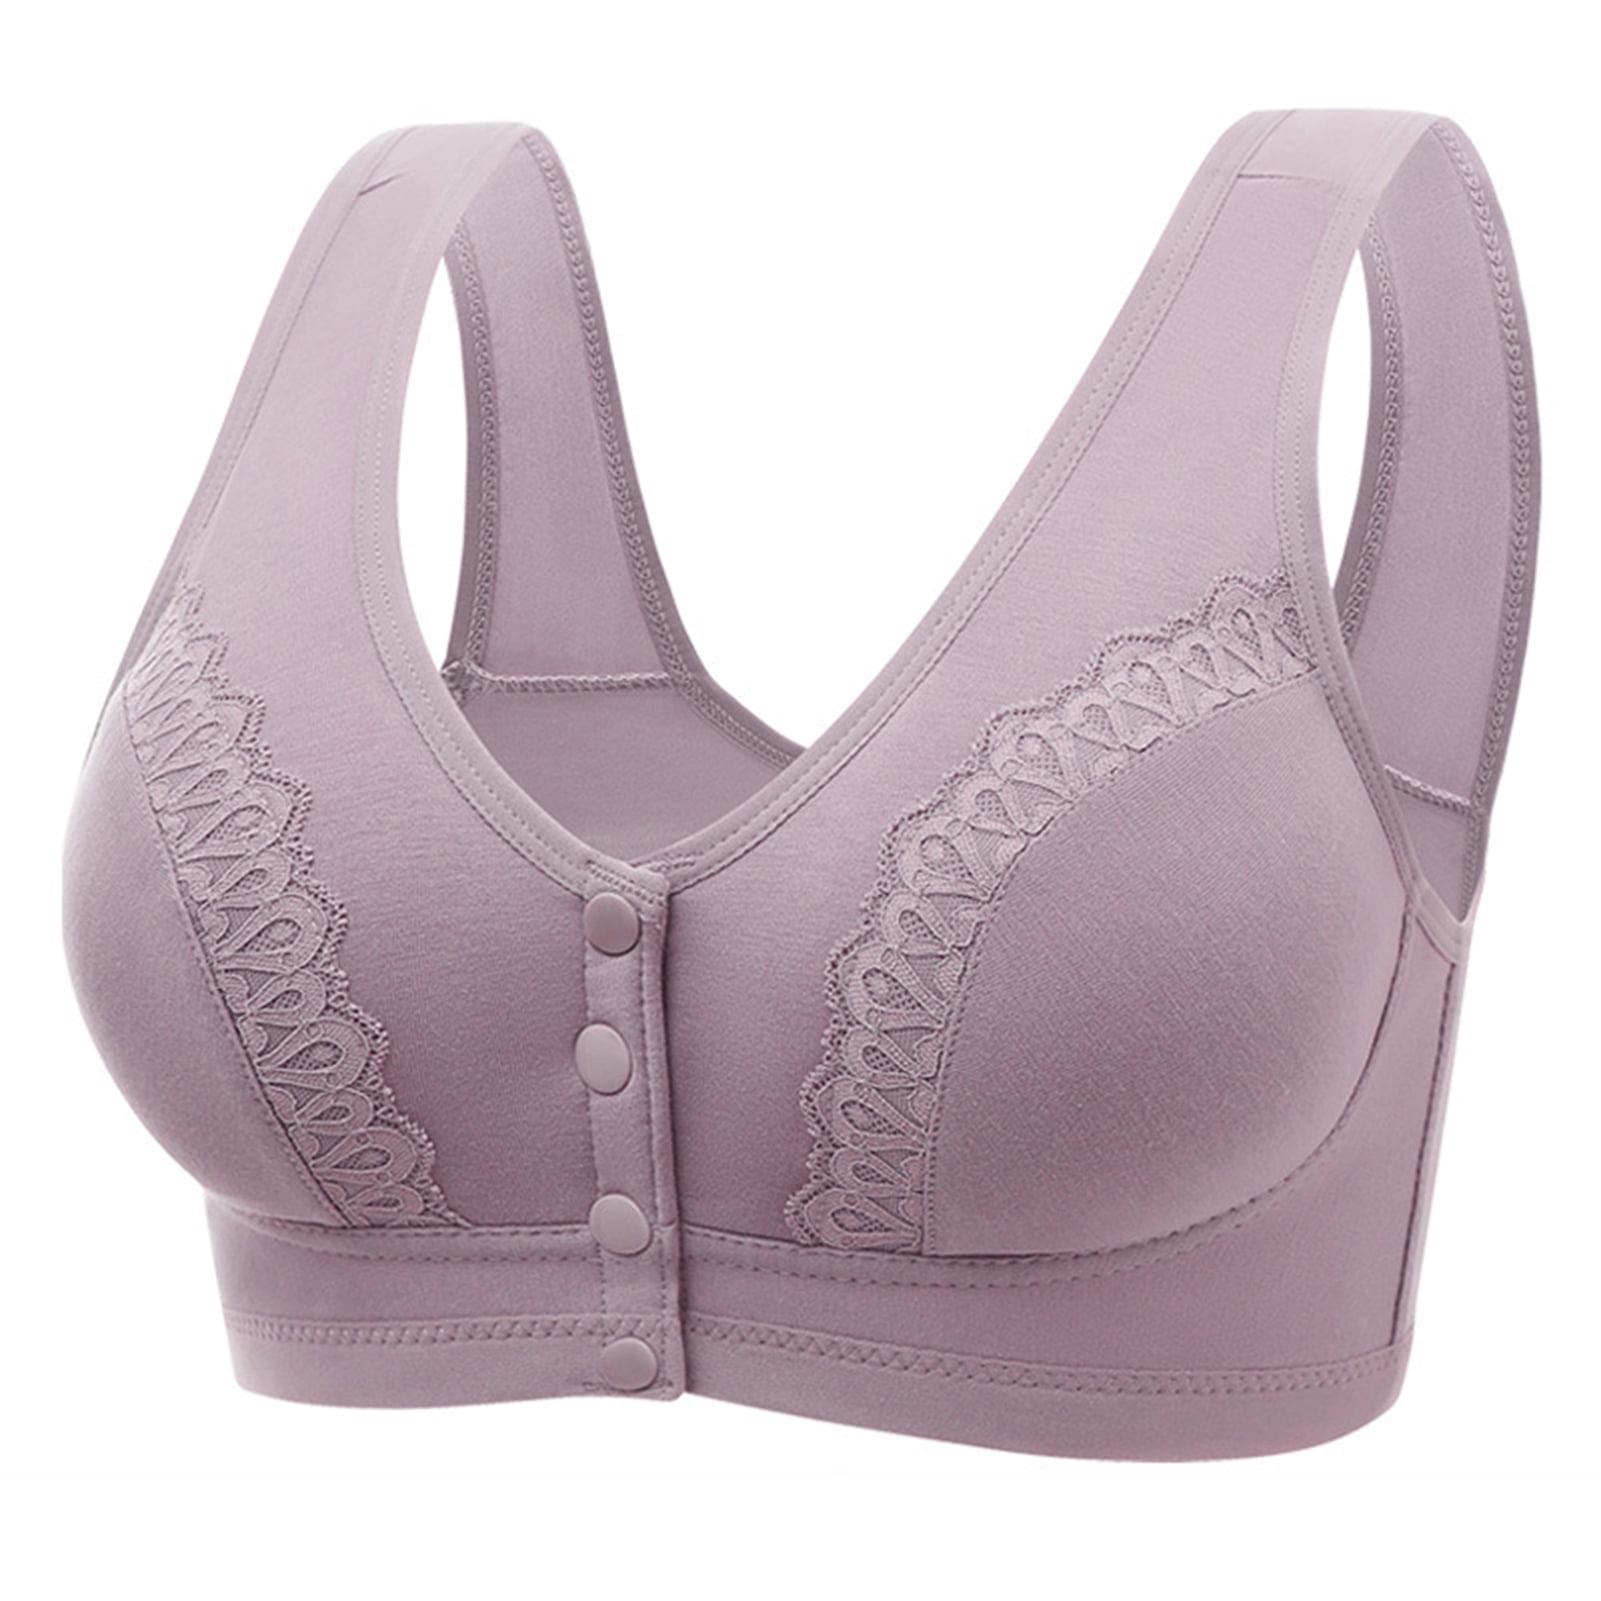 Wholesale front open bra in cotton For Supportive Underwear 